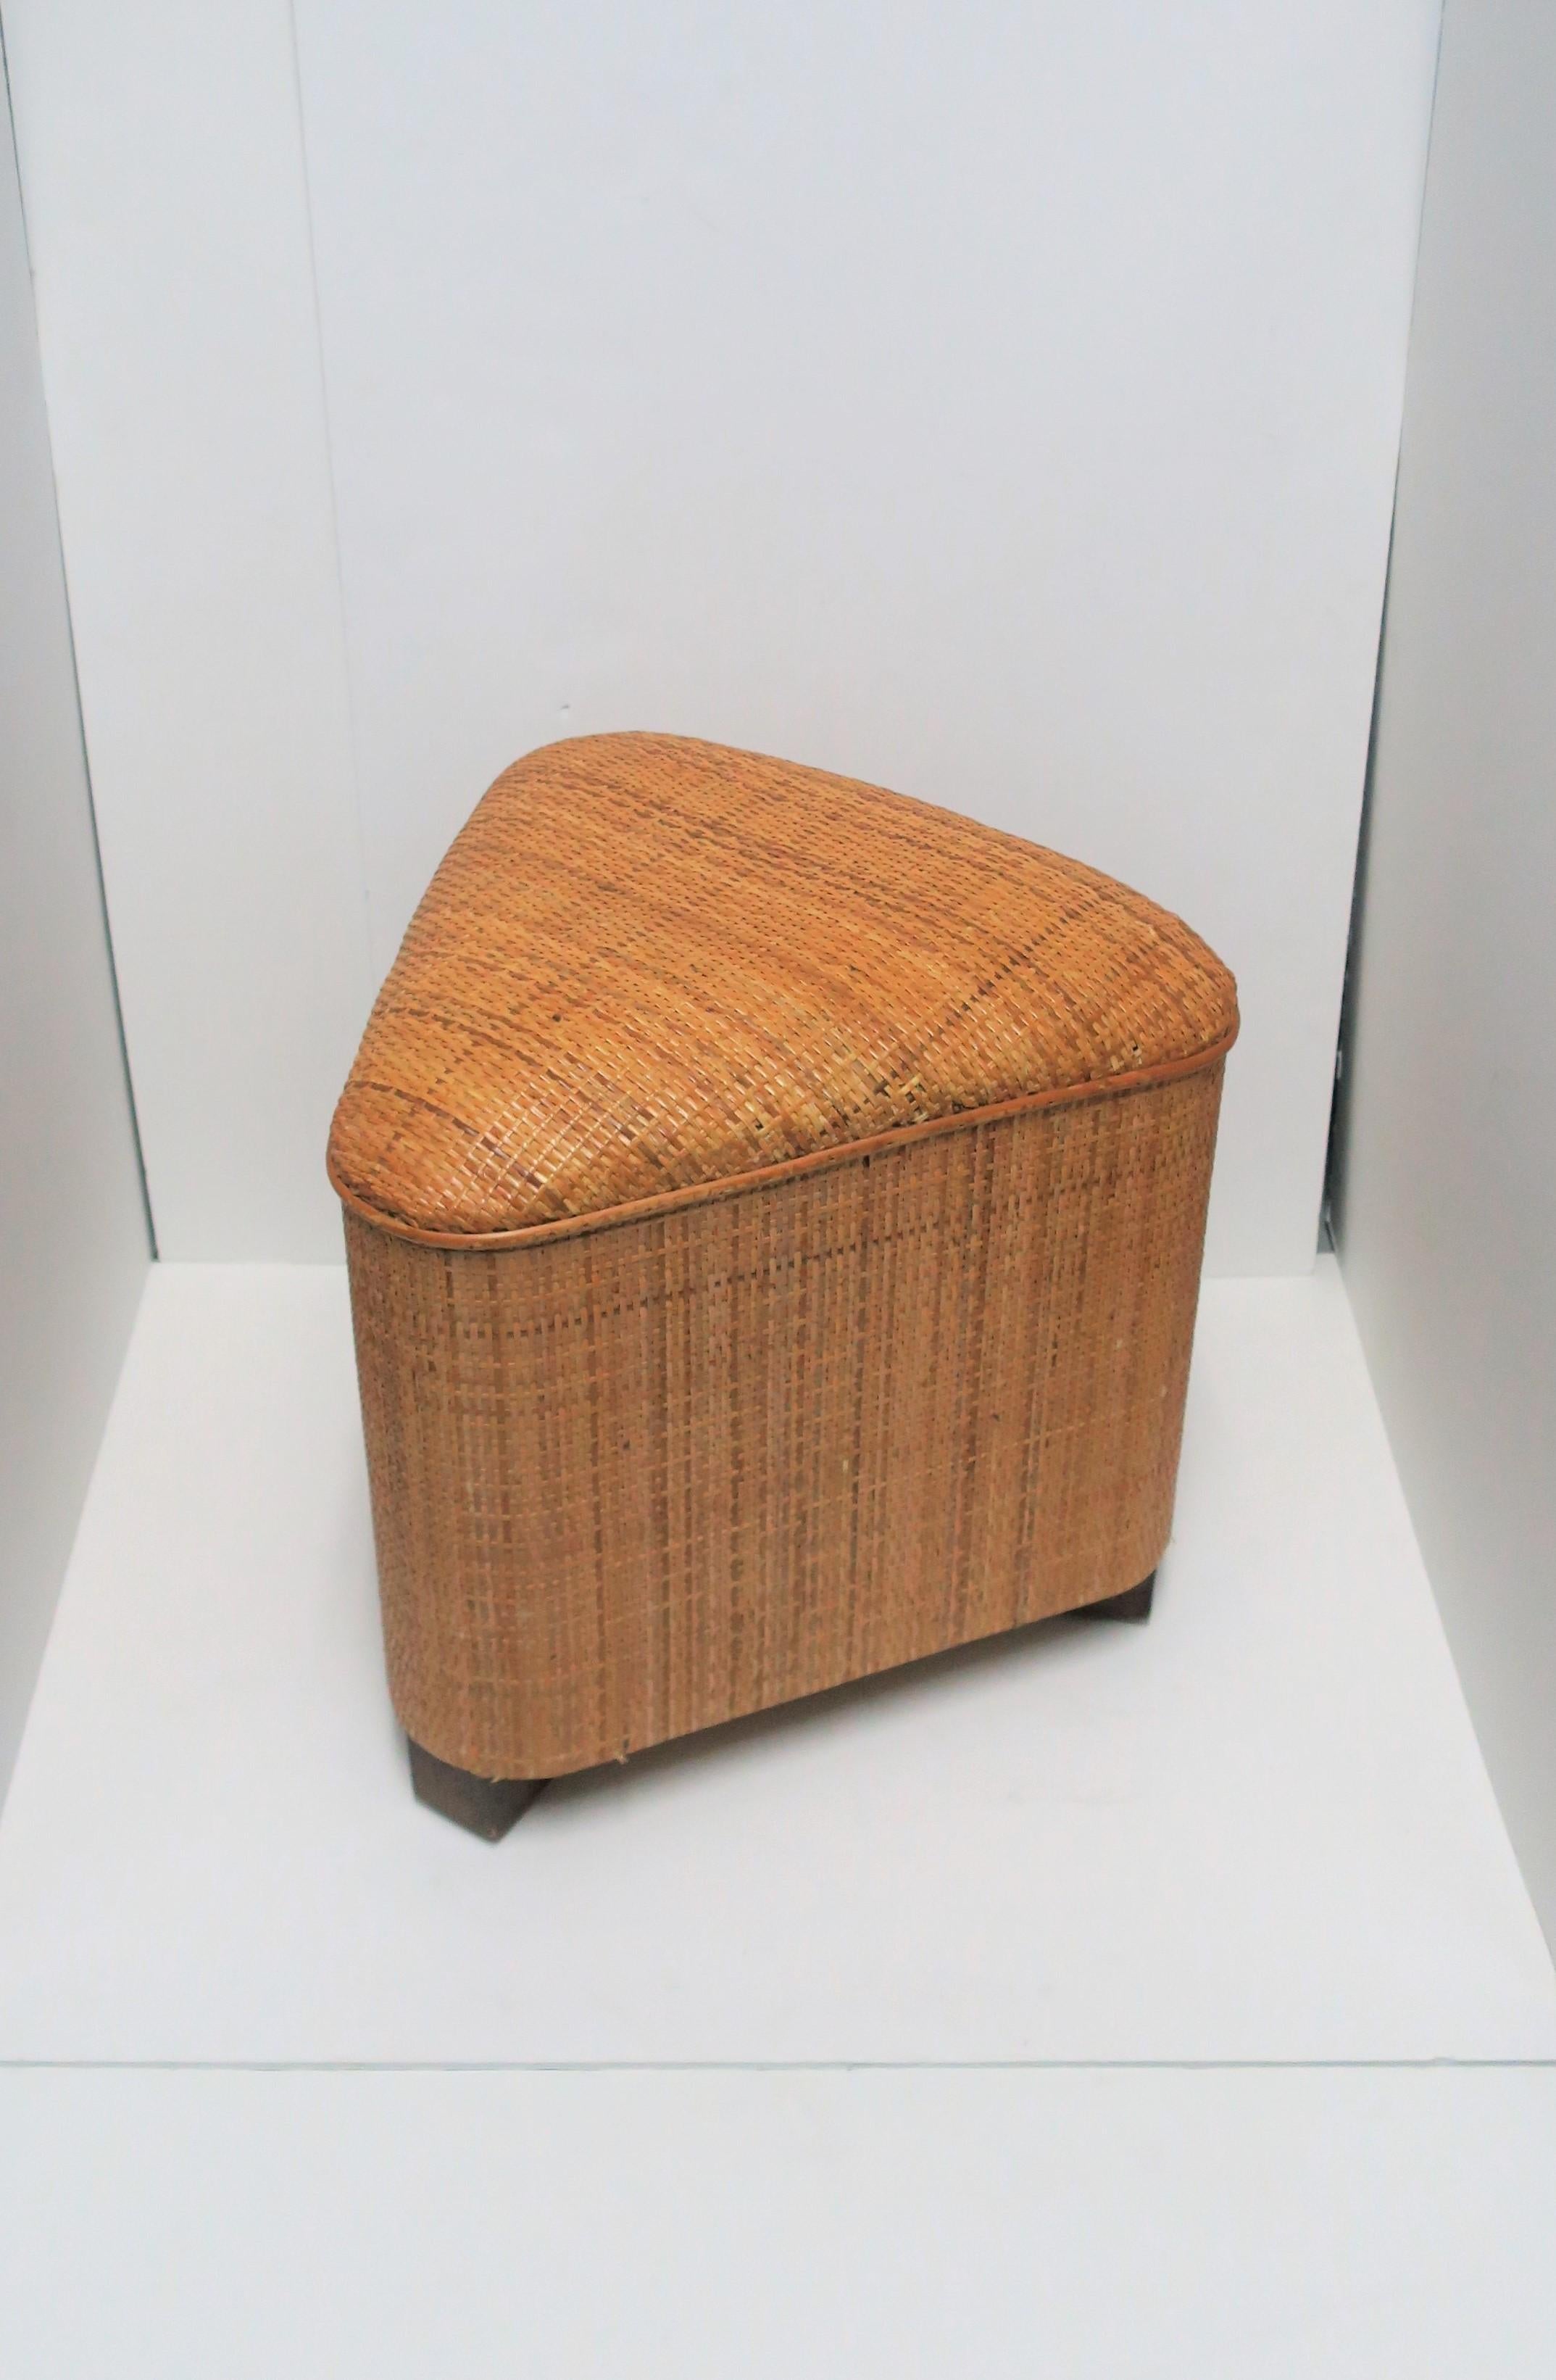 This is a small and convenient geometric or 'triangle' wicker seat/bench/stool, circa early 21st century. Piece may even be used as a side table providing there is a stabile environment on top for support, i.e., book, tray, etc., (demonstrated in